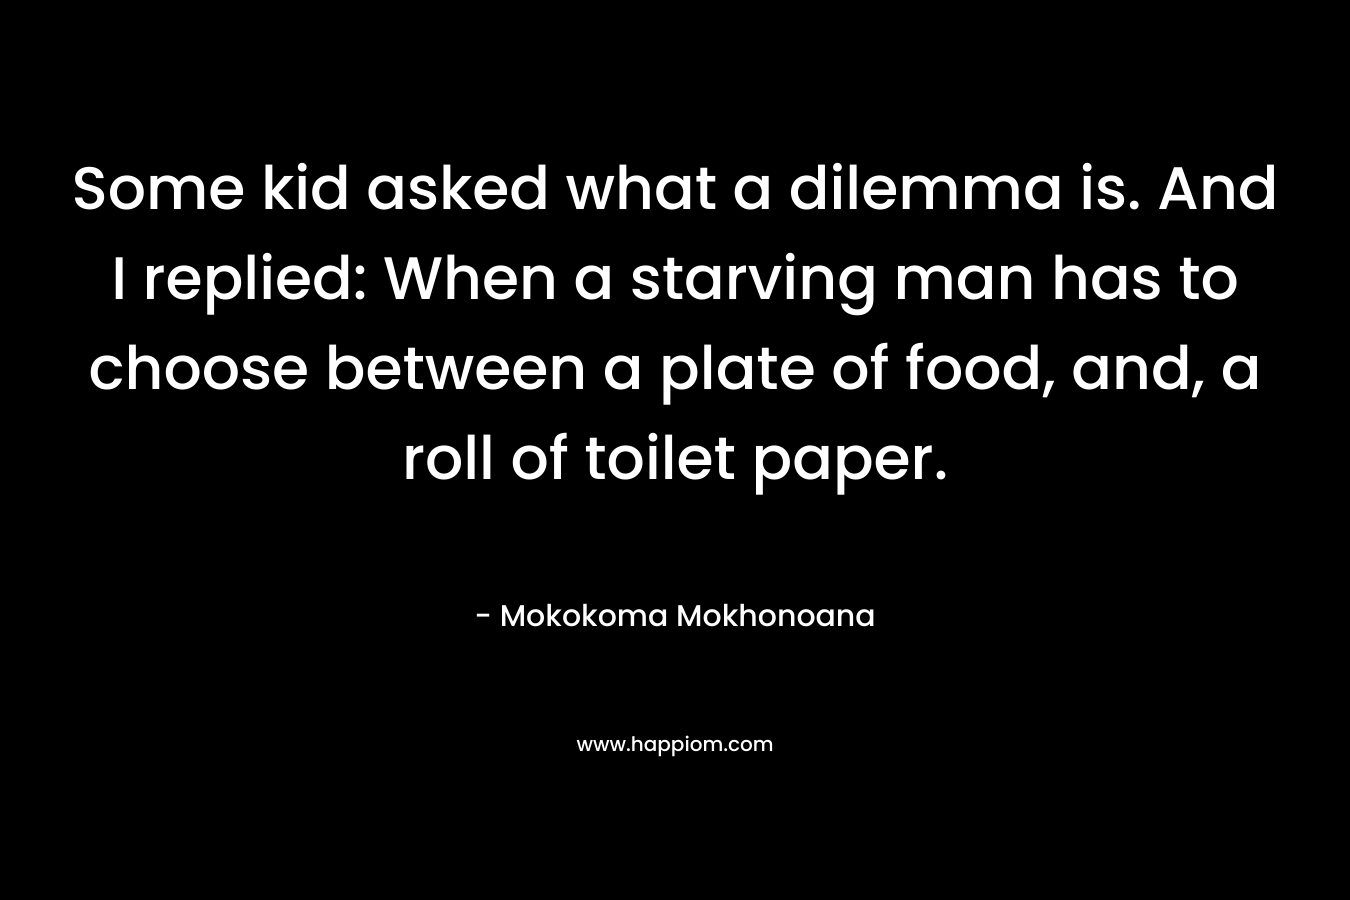 Some kid asked what a dilemma is. And I replied: When a starving man has to choose between a plate of food, and, a roll of toilet paper.